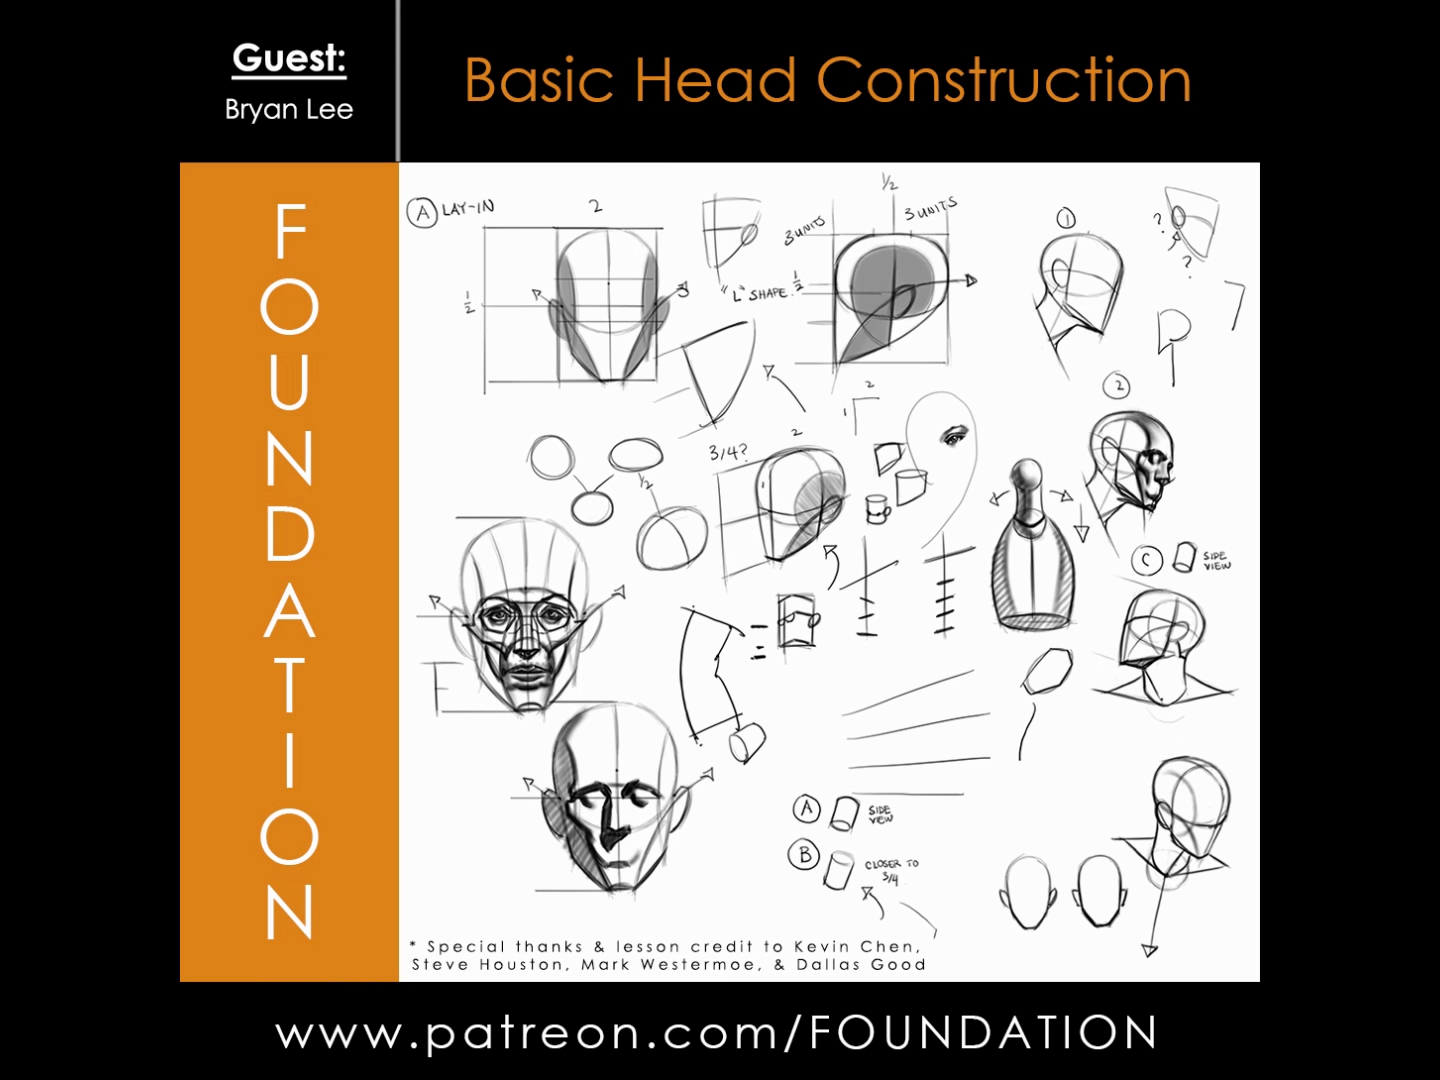 Basic Head Construction with Bryan Lee